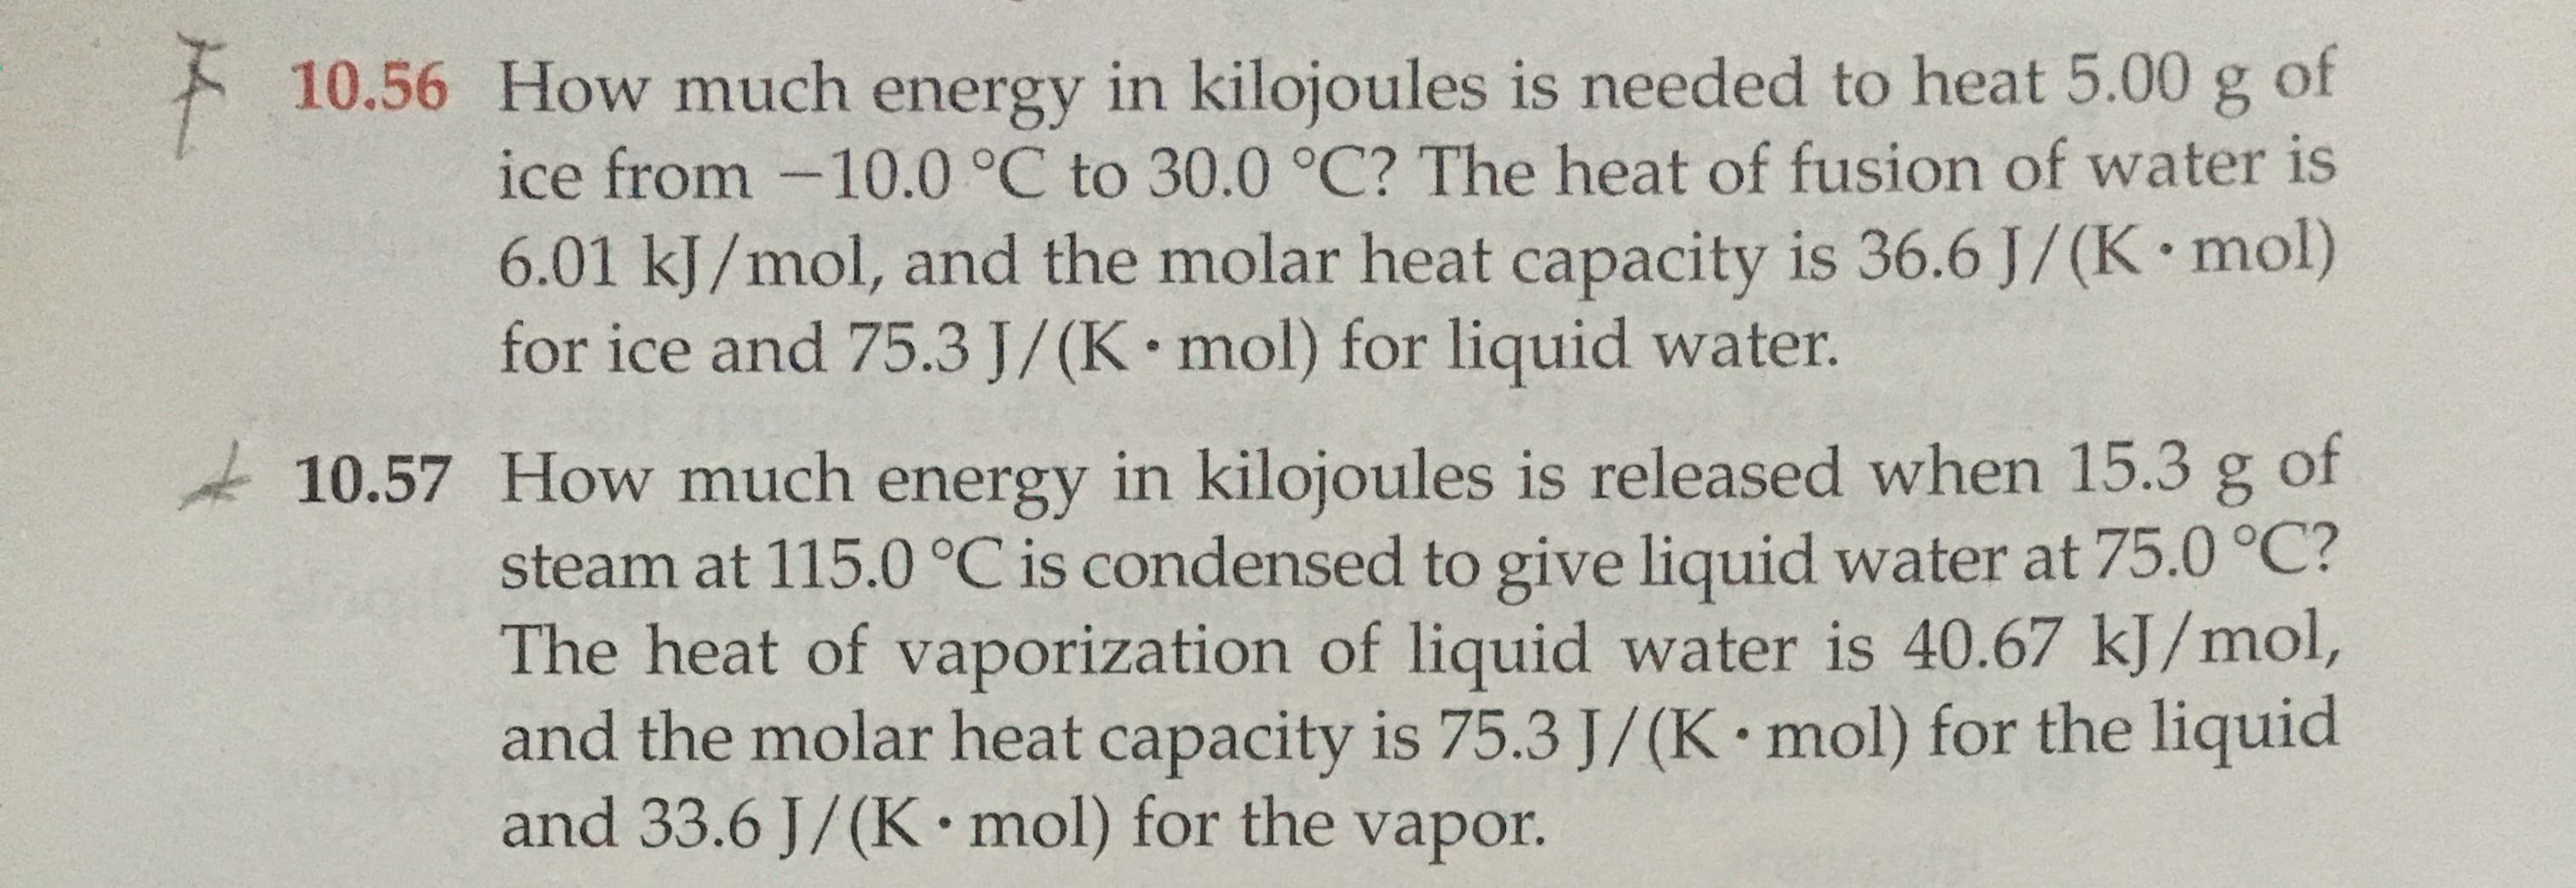 How much energy in kilojoules is needed to heat 5.00 g of
ice from -10.0 °C to 30.0 °C? The heat of fusion of water is
6.01 kJ/mol, and the molar heat capacity is 36.6 J/(K mol)
for ice and 75.3 J/(K mol) for liquid water.
